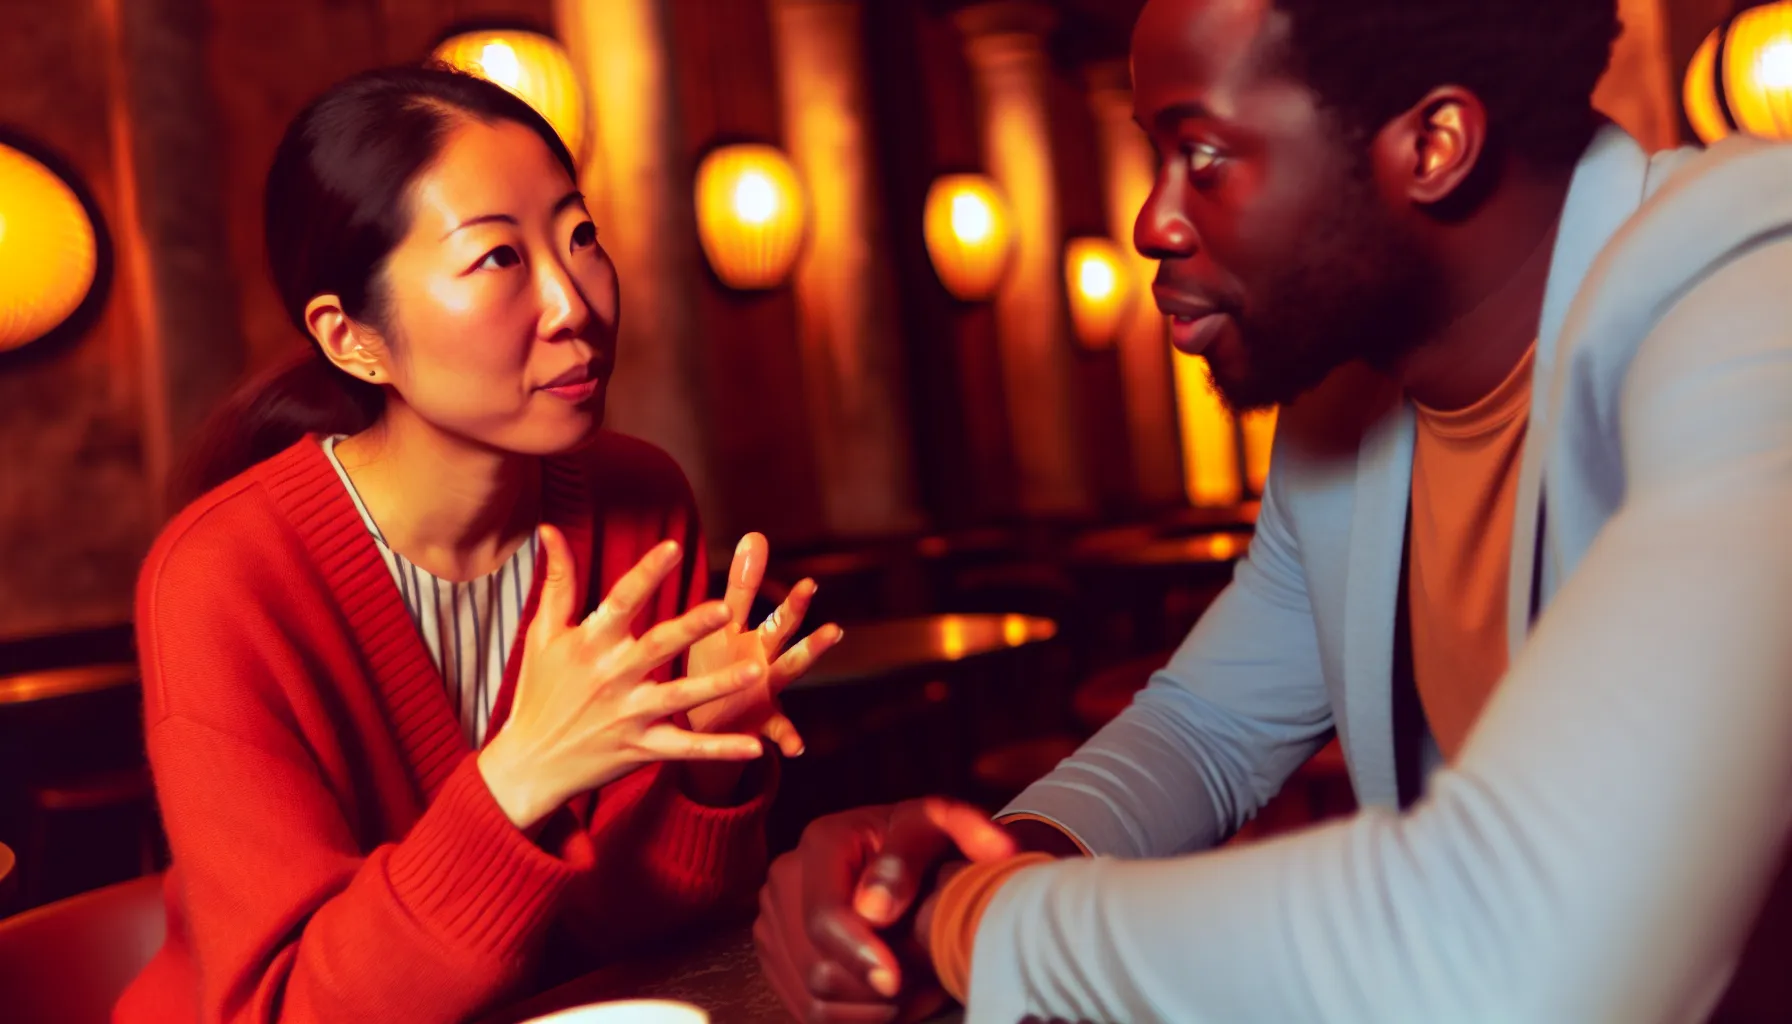 Couple deeply engaged in conversation